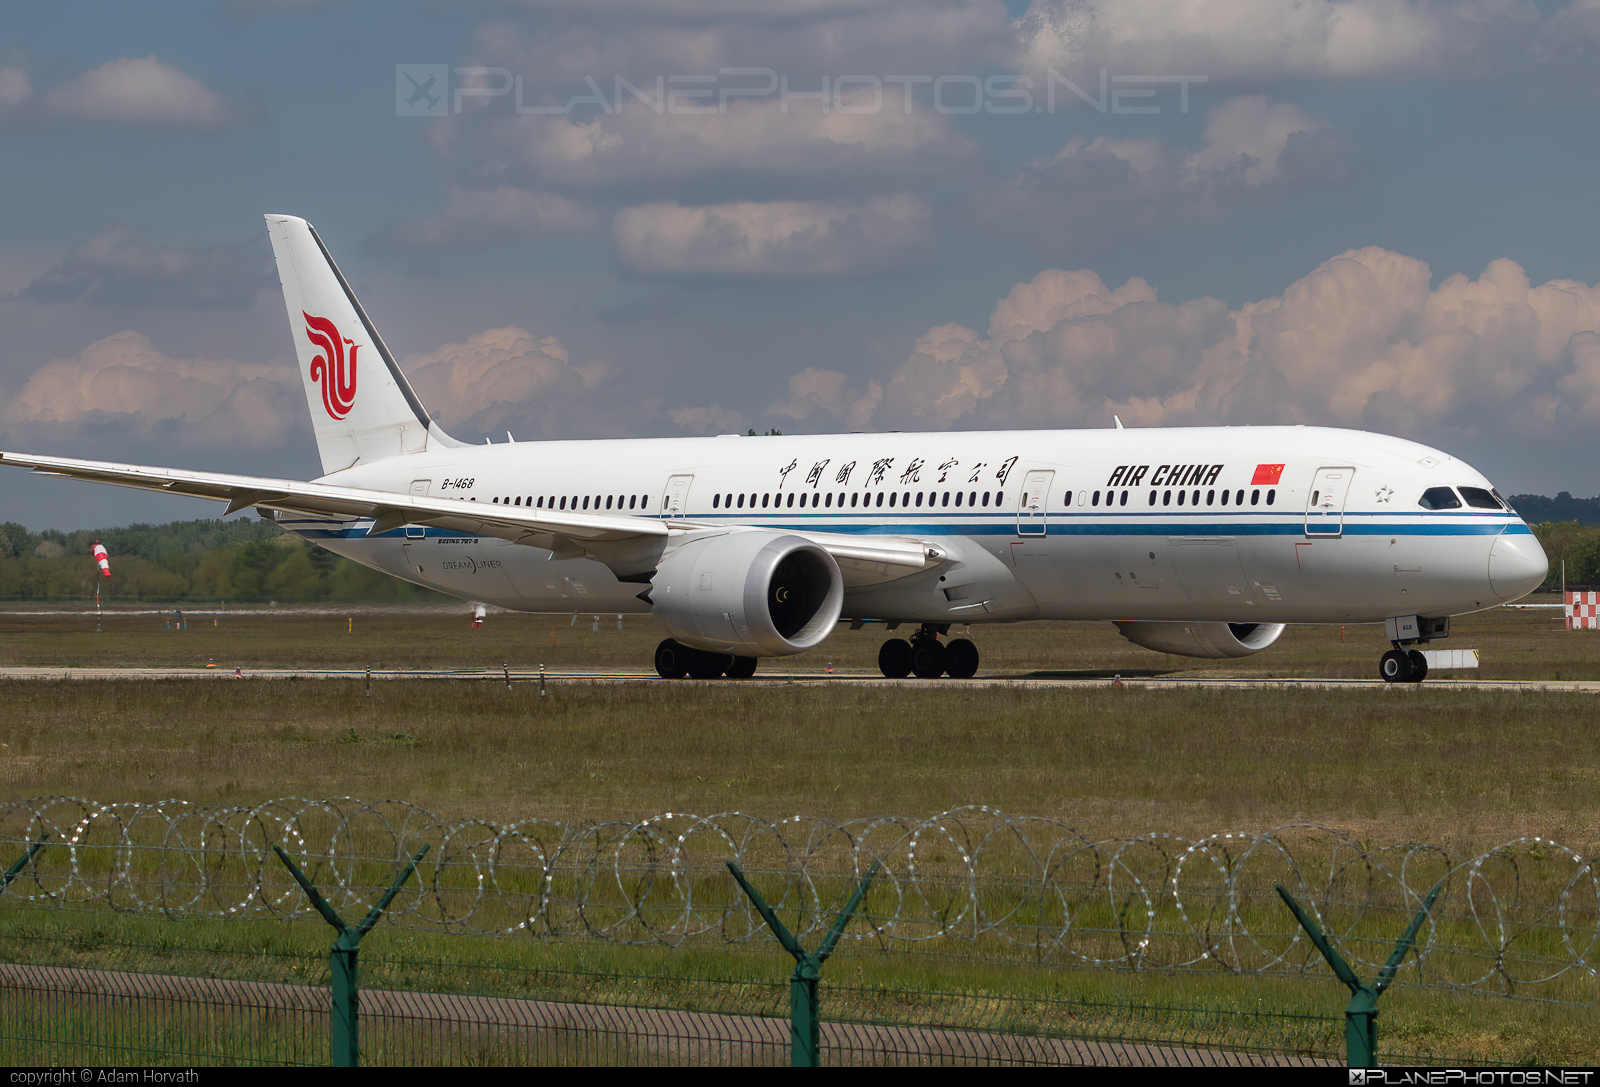 Boeing 787-9 Dreamliner - B-1468 operated by Air China #airchina #b787 #boeing #boeing787 #dreamliner